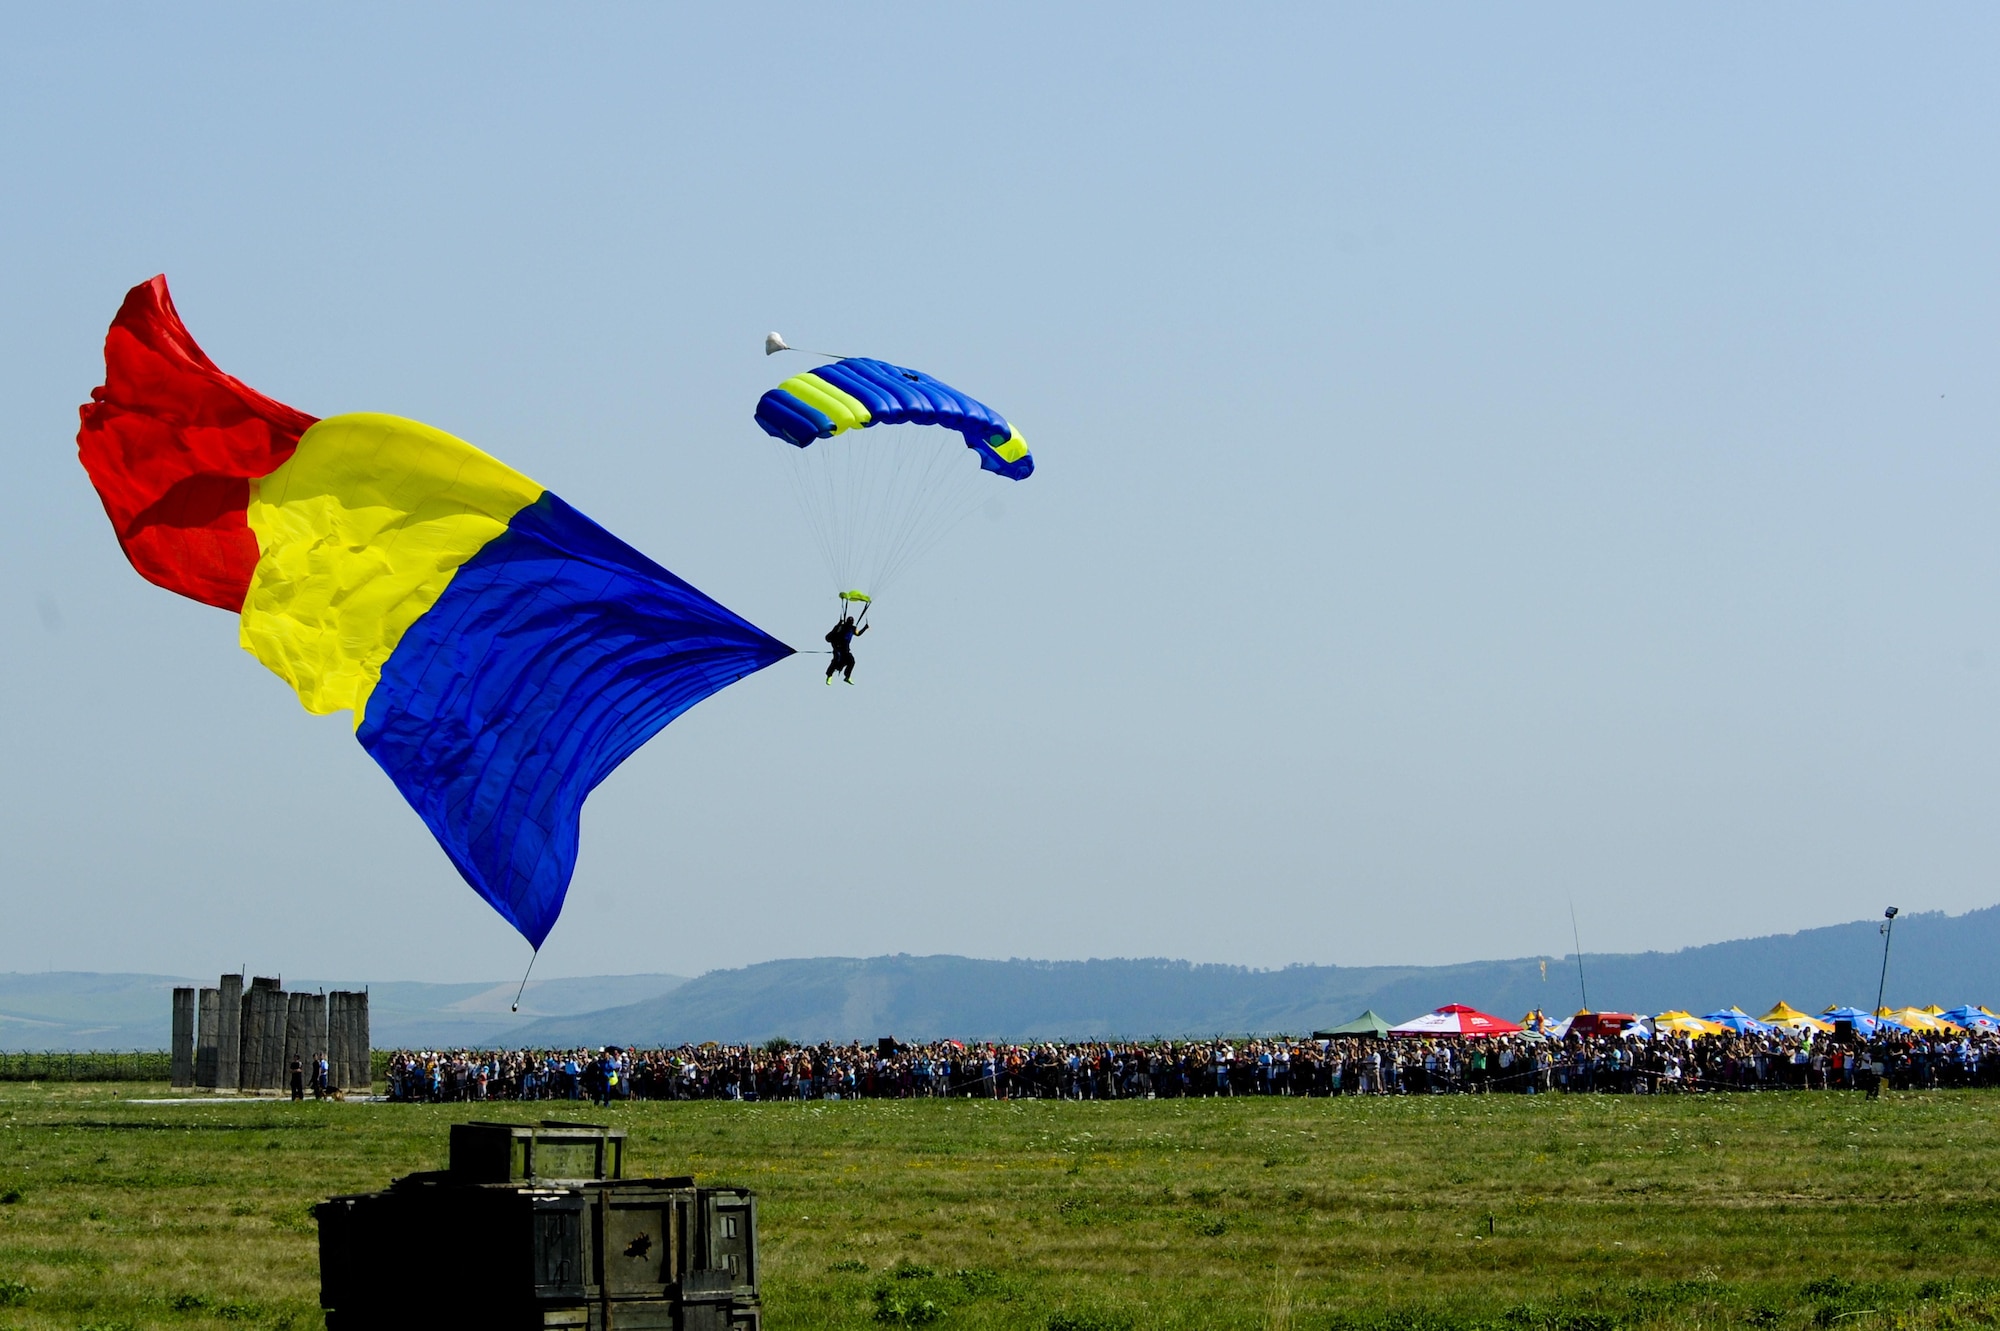 A parachutist floats to the ground while bearing a large Romanian flag before hundreds of spectators during the Romanian air force's 71st Air Base's air show and open house at Campia Turzii, Romania, July 23, 2016. The aviation demonstration took place during the middle of the U.S. Air Force's 194th Expeditionary Fighter Squadron's six-month long theater security package deployment to Europe in support of Operation Atlantic Resolve, which aims to bolster the U.S.'s continued commitment to the collective security of NATO and dedication to the enduring peace and stability in the region. The unit, comprised of more than 200 CANG Airmen from the 144th Fighter Wing at Fresno ANG Base, Calif., as well as U.S. Air Force Airmen from the 52nd Fighter Wing at Spangdahlem Air Base, Germany, piloted, maintained and supported the deployment of 12 F-15Cs Eagle fighter aircraft throughout nations like Romania, Iceland, the United Kingdom, the Netherlands, Estonia and among others. The F-15Cs took to the skies alongside the 71st AB's MiG-21 fighter aircraft and Puma helicopters for both the airshow, the second engagement of its kind at Campia Turzii under Operation Atlantic Resolve, and the bilateral flight training, also known as Dacian Eagle 2016. (U.S. Air Force photo by Staff Sgt. Joe W. McFadden/Released)